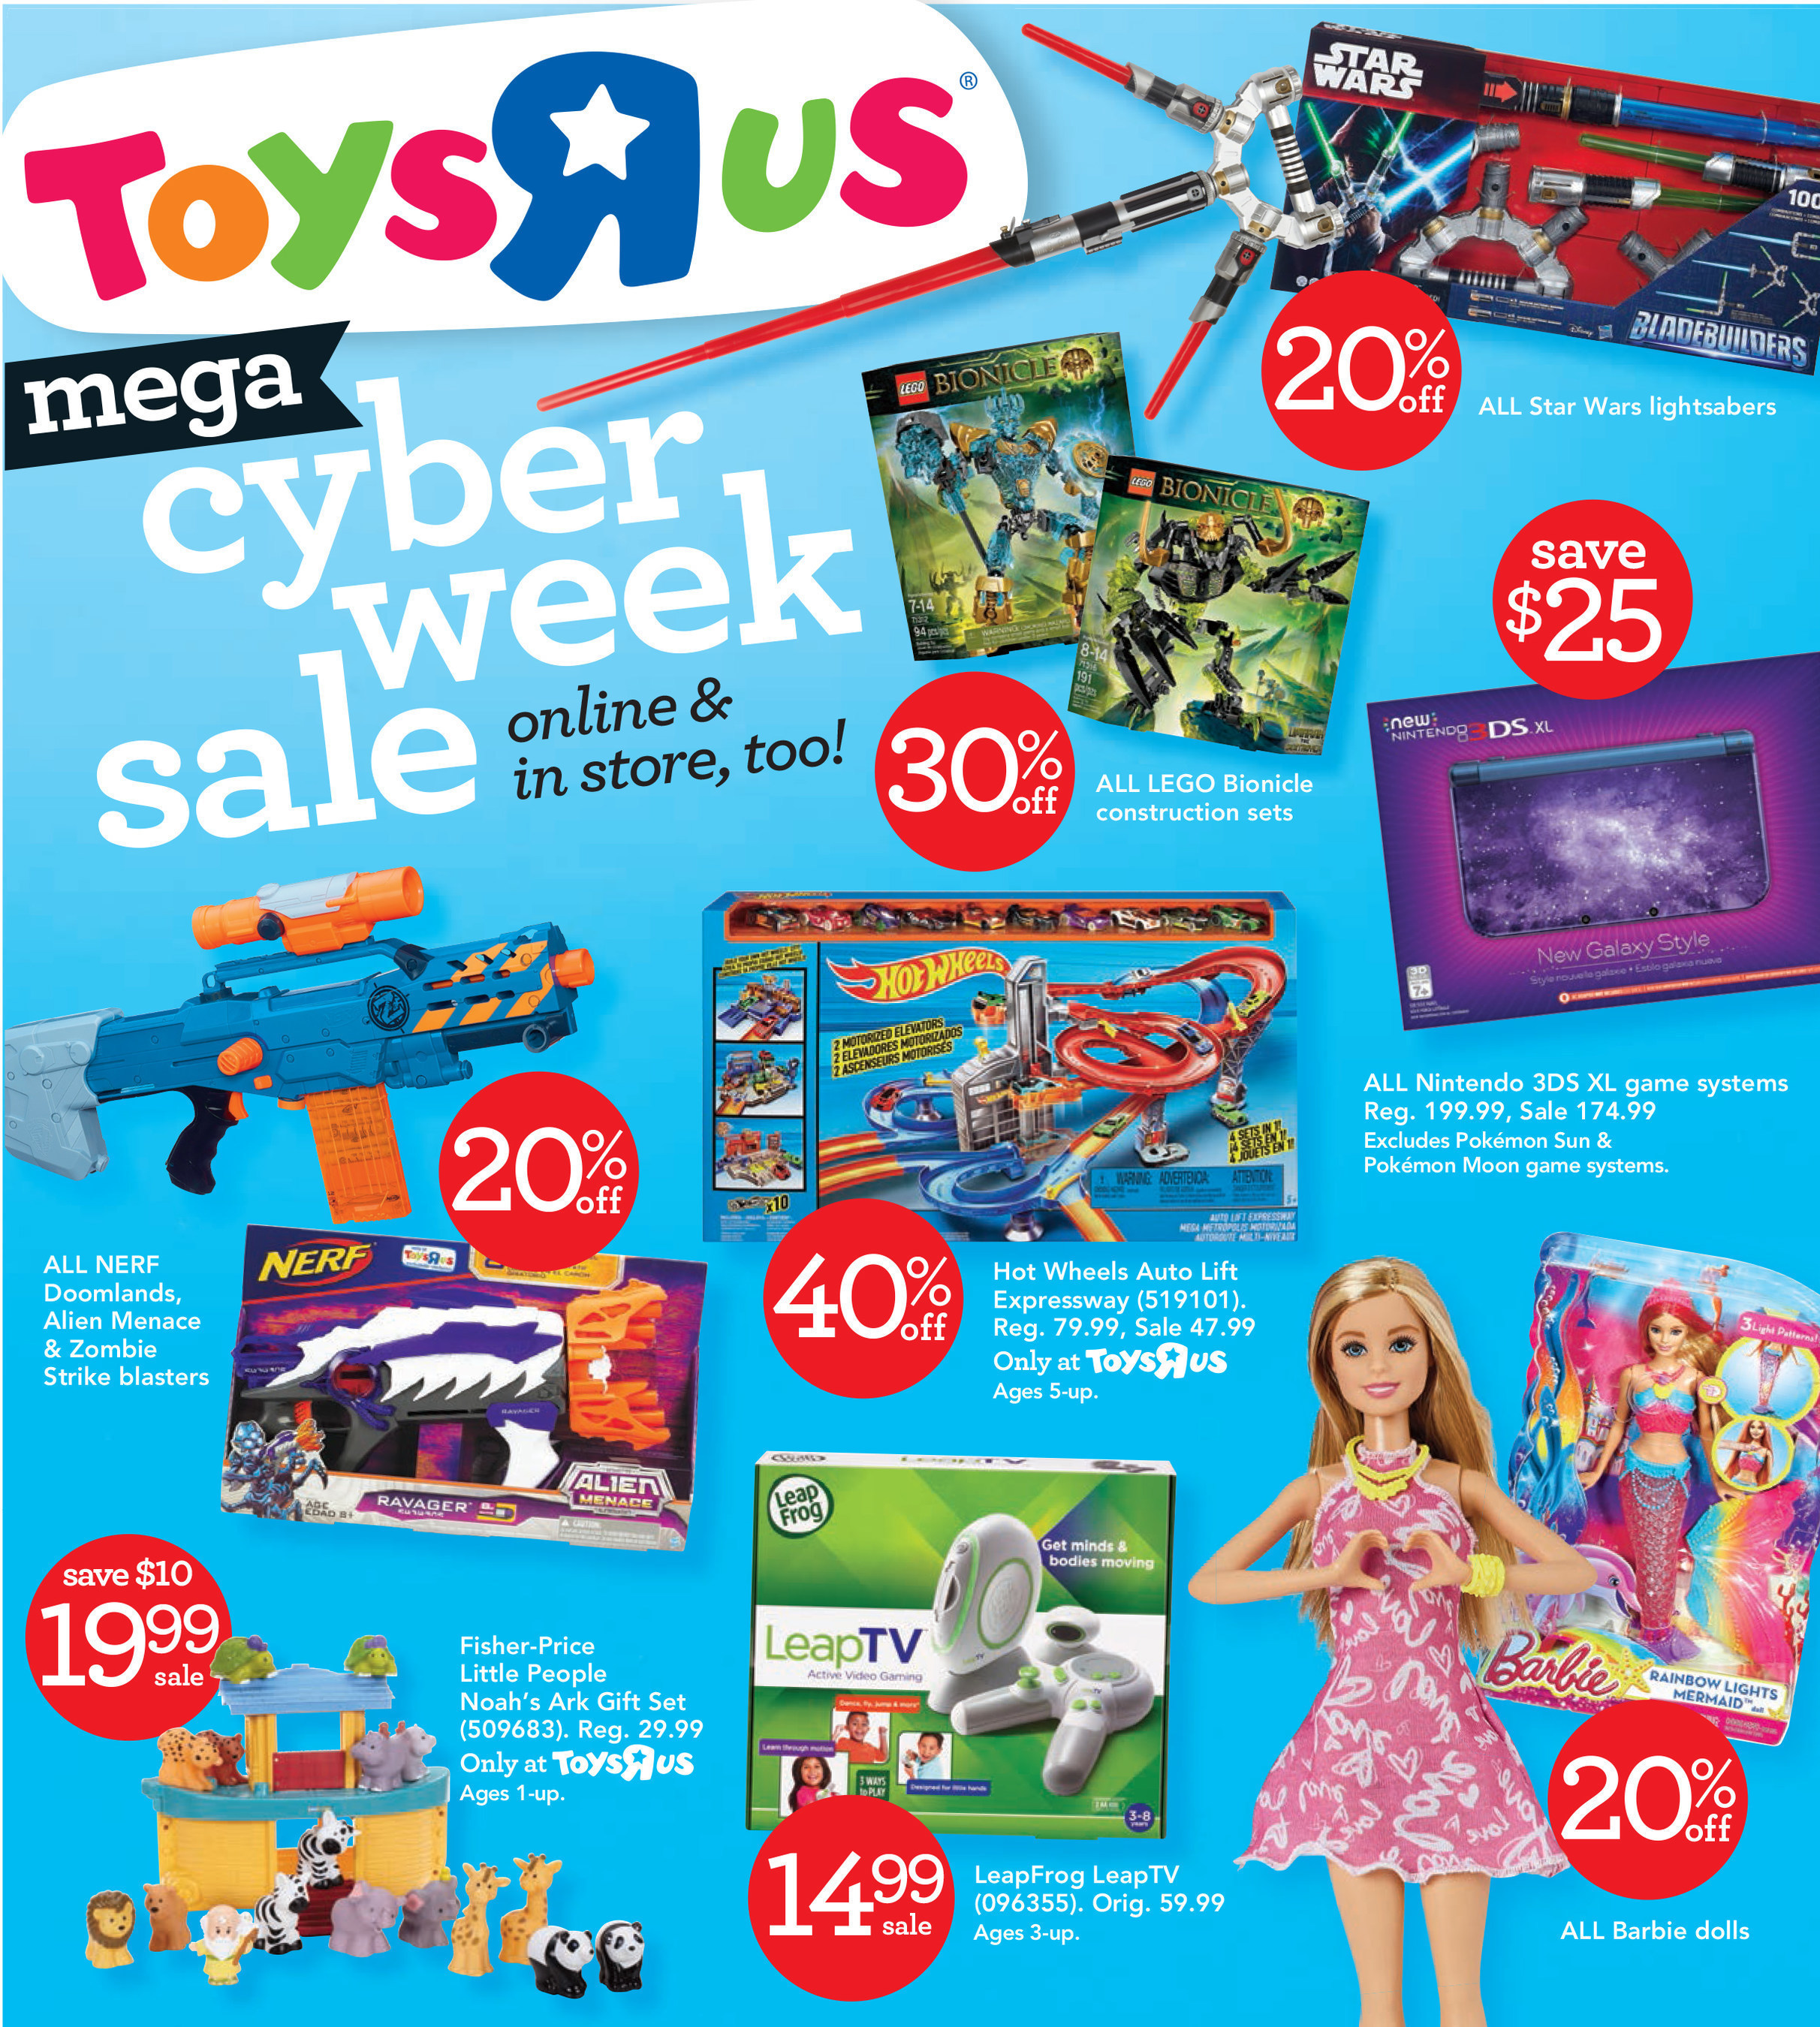 Toys R Us To Start Its Cyber Week On